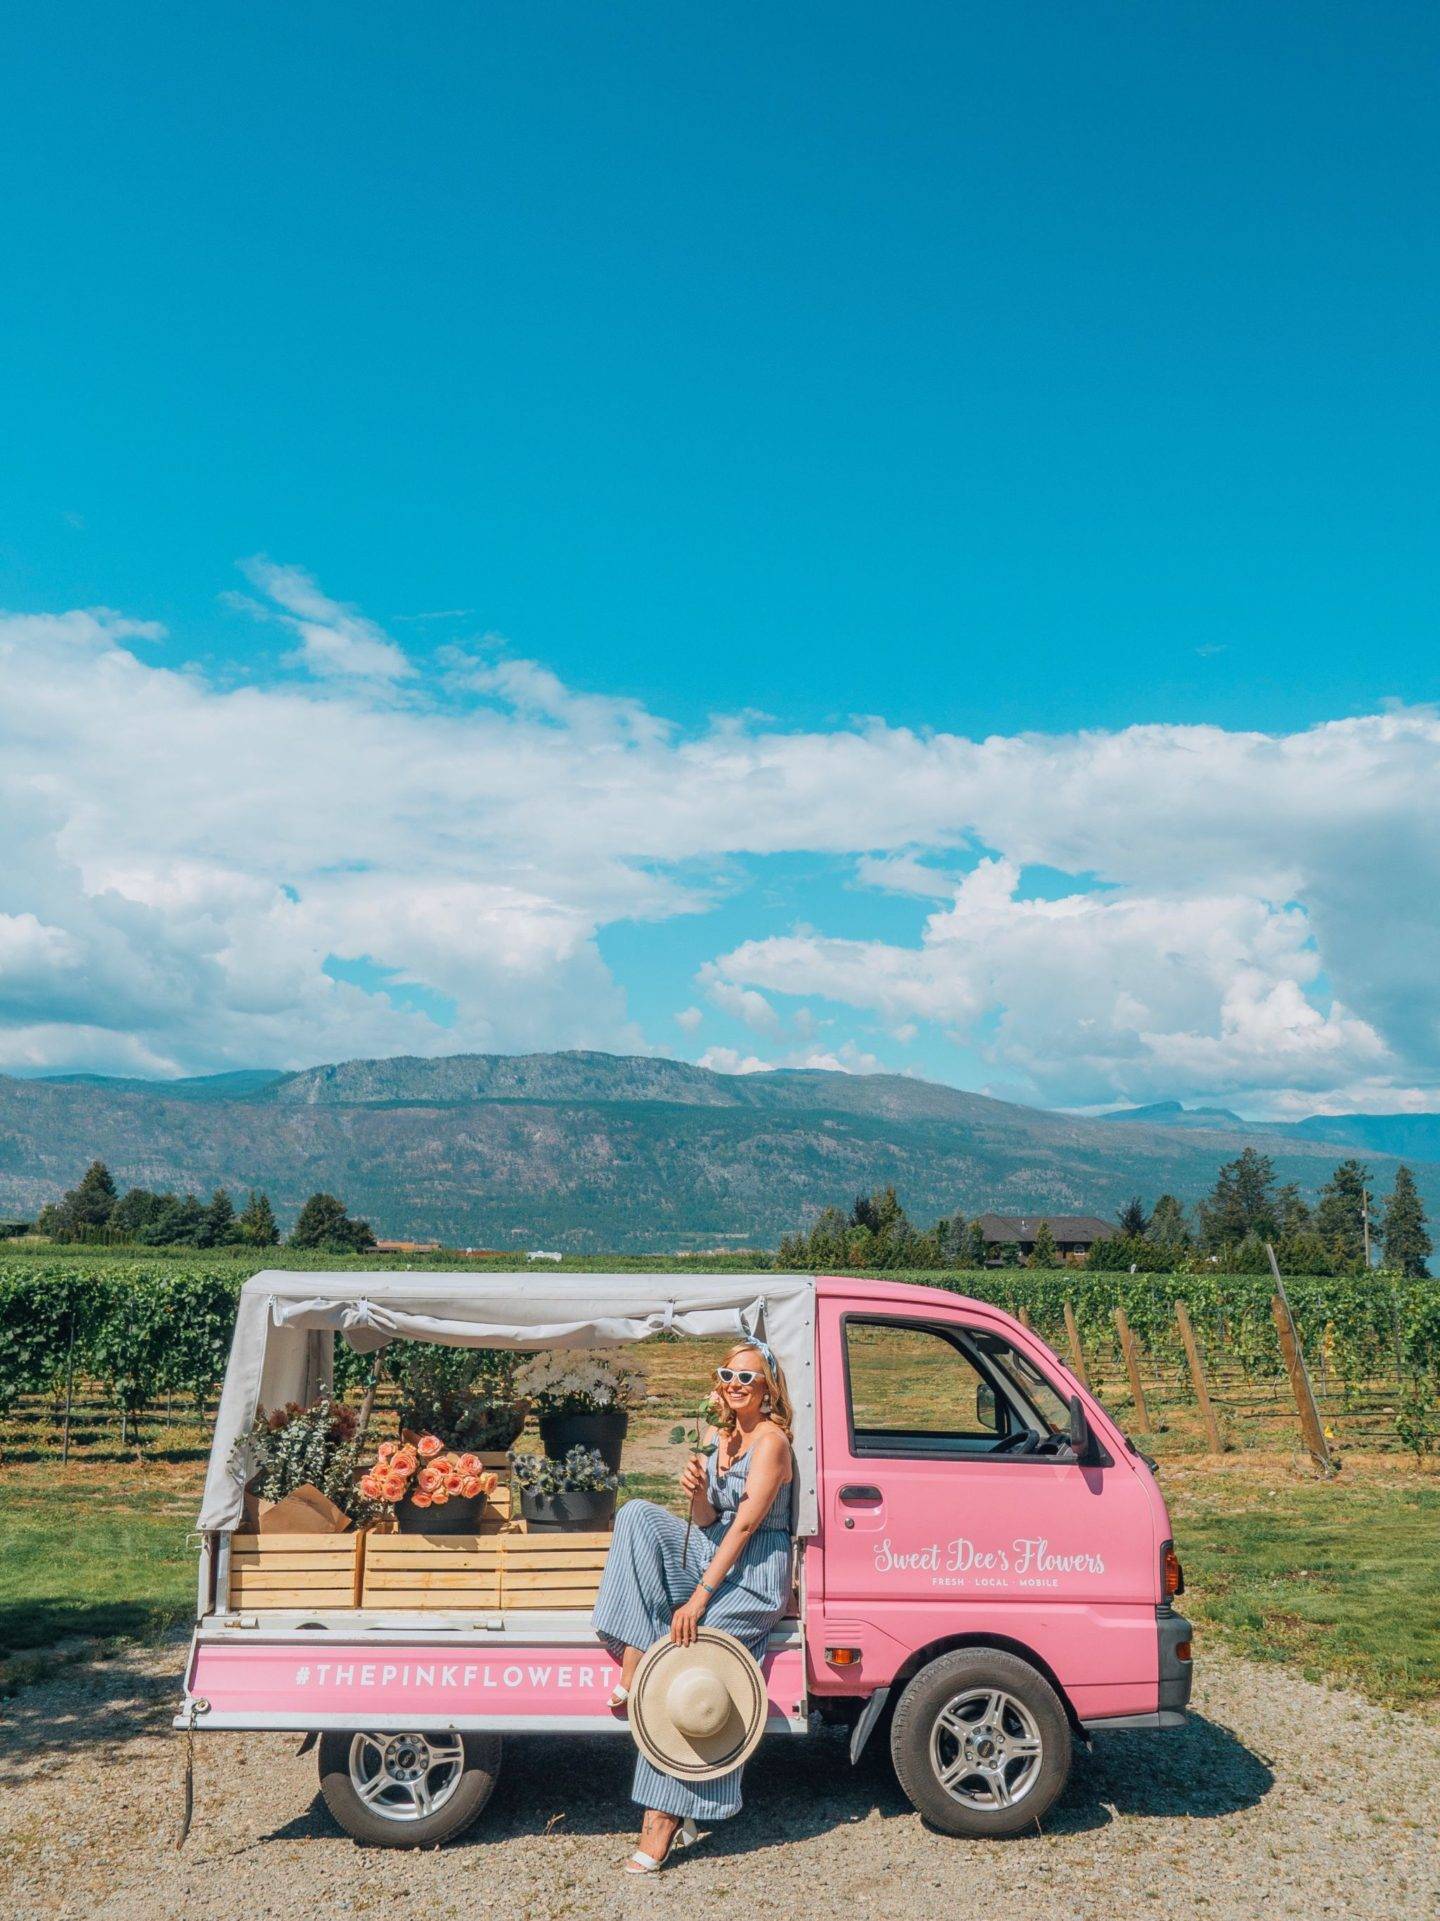 Looking for the most beautiful Instagrammable places in Kelowna? Check out this guide to find the best photography spots in Kelowna! 

Pictured here: Sweet Dee's Flower Truck